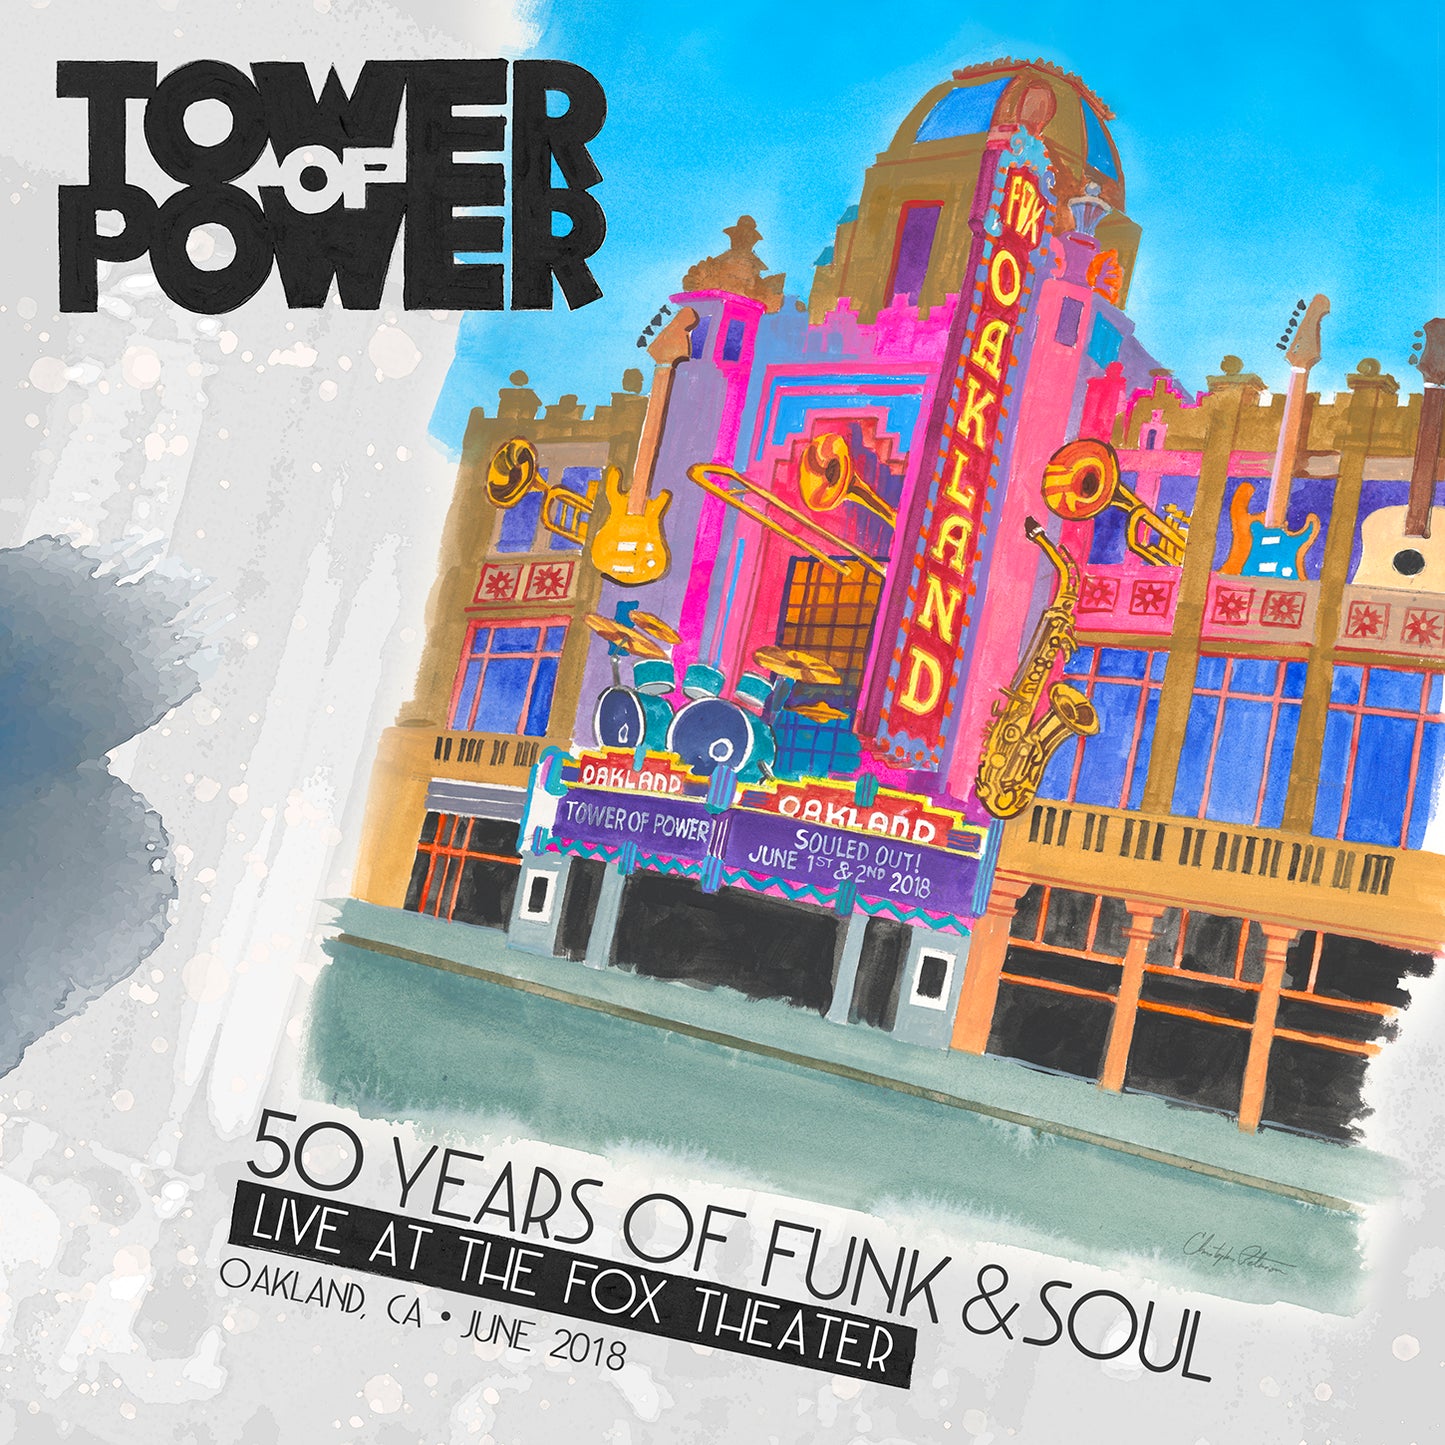 50 Years Of Funk & Soul  Tower Of Power